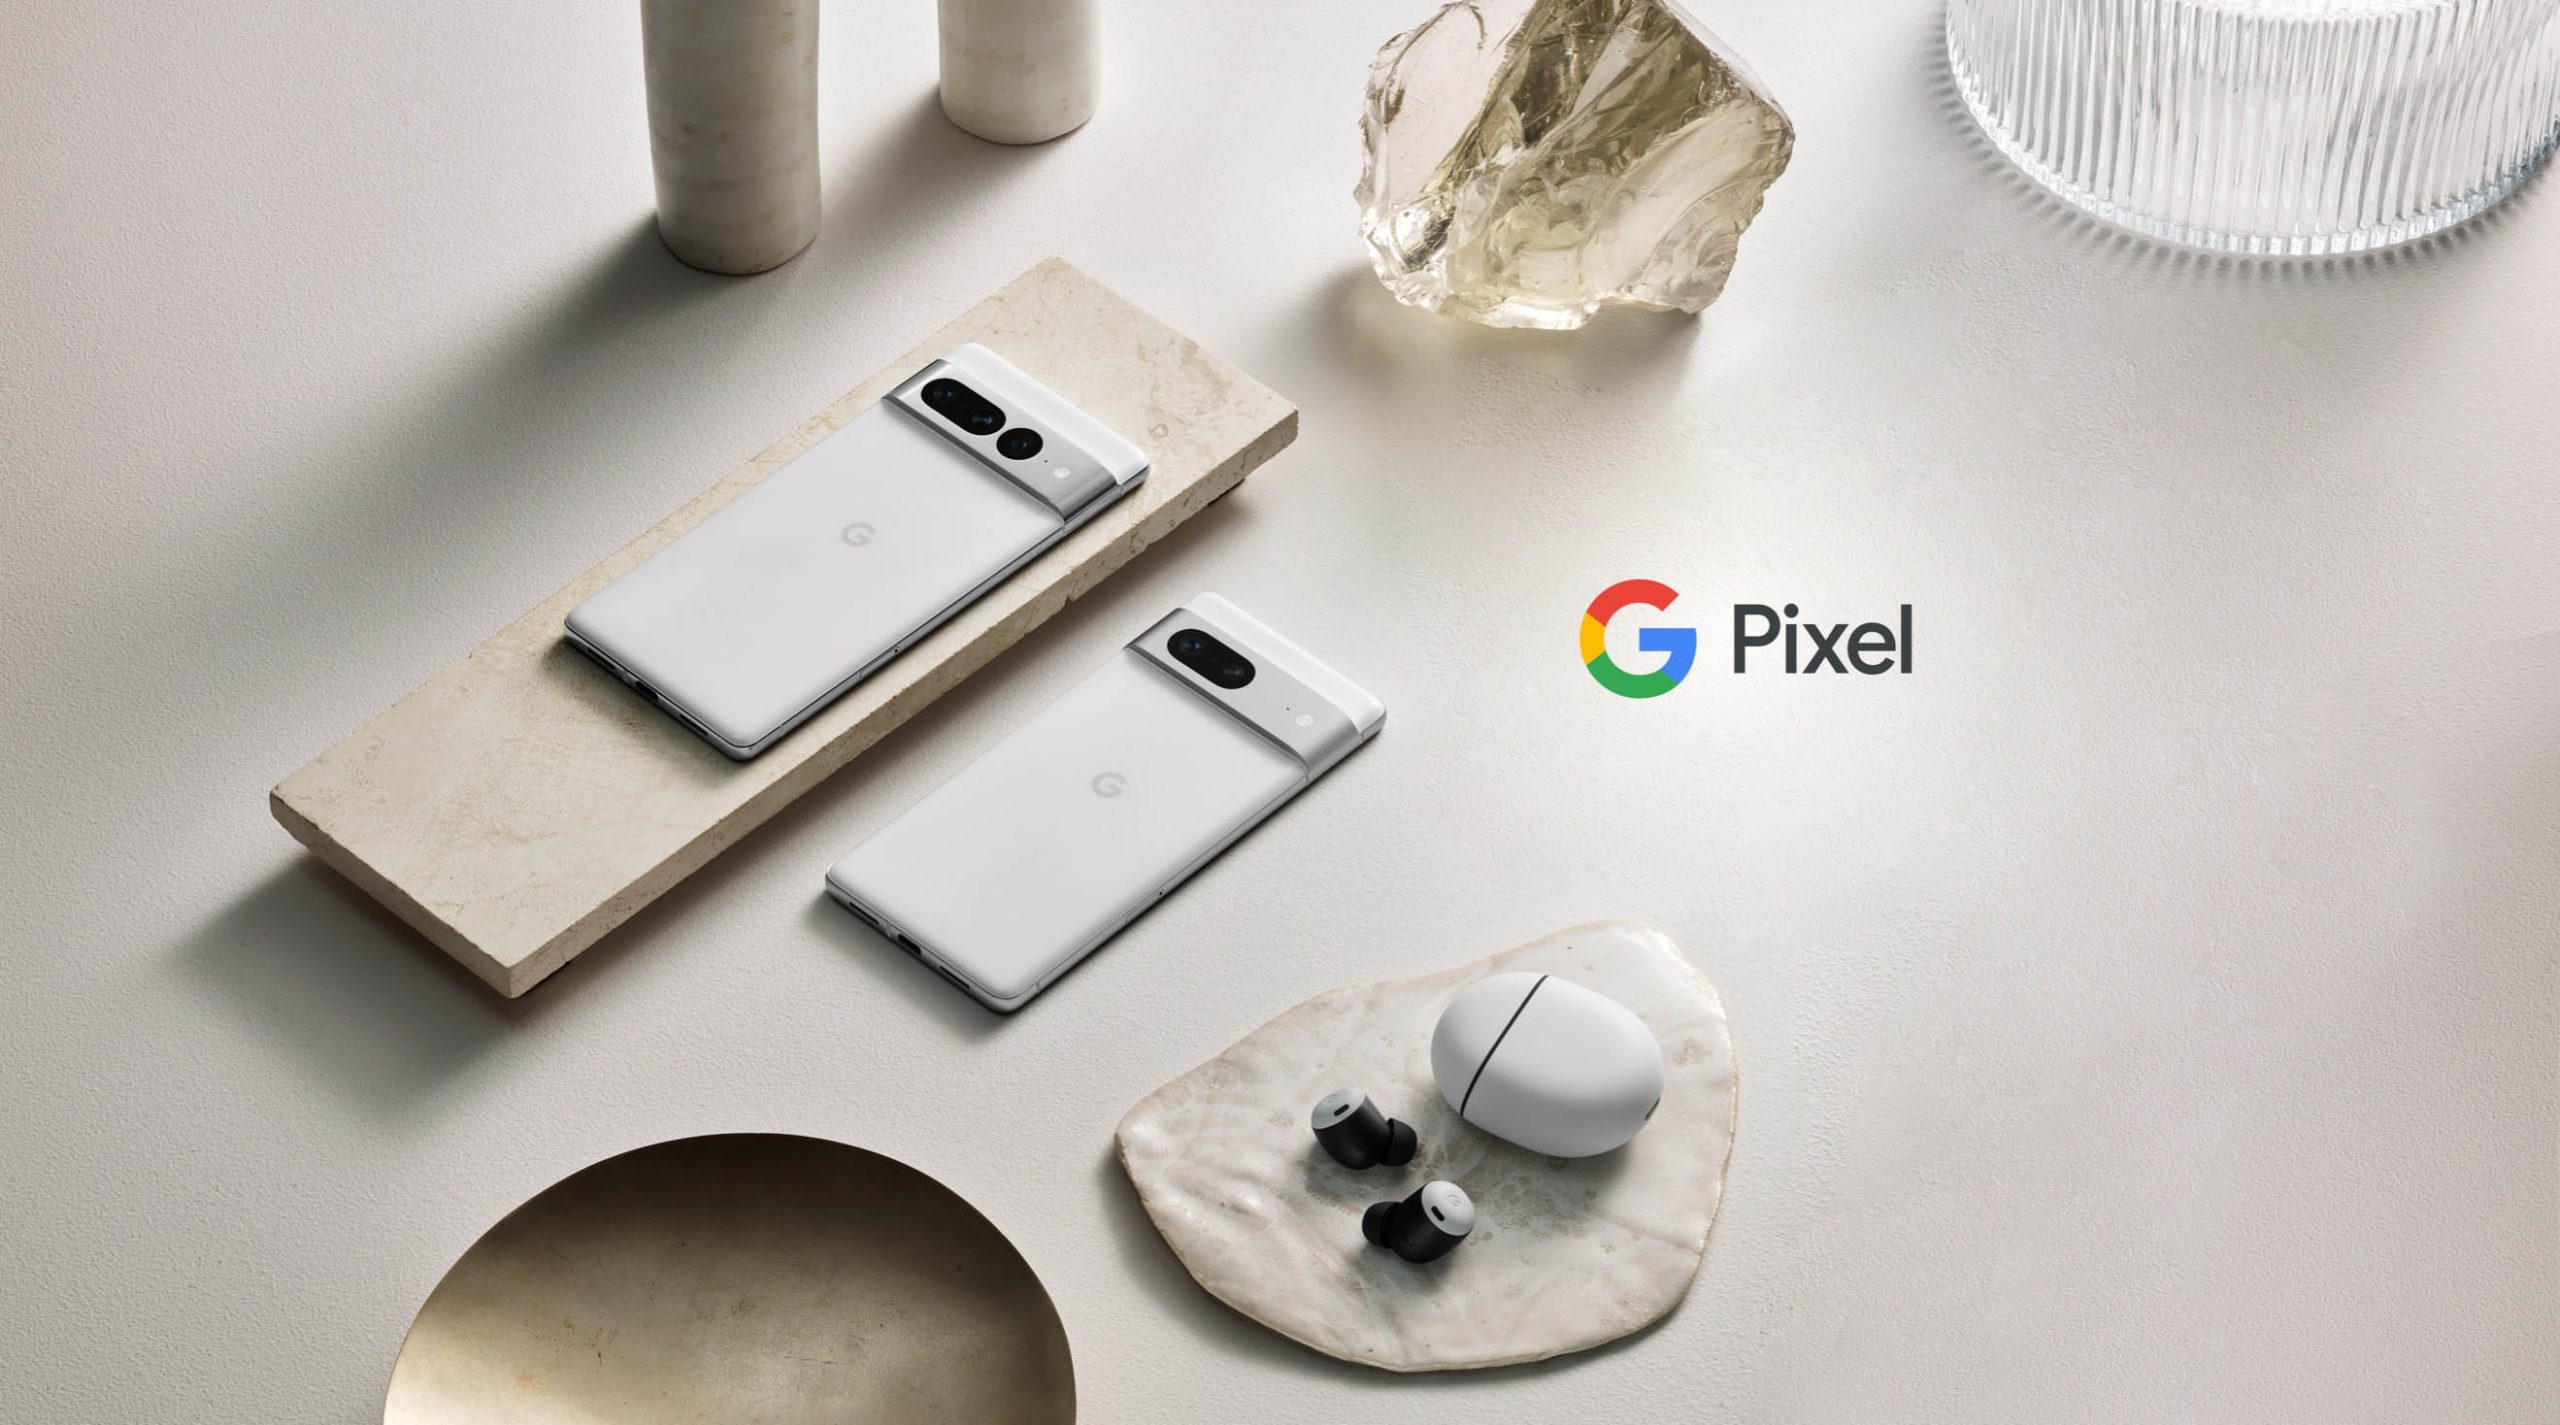 Google Pixel 7 and 7 Pro with Free Google Pixel Buds Pro